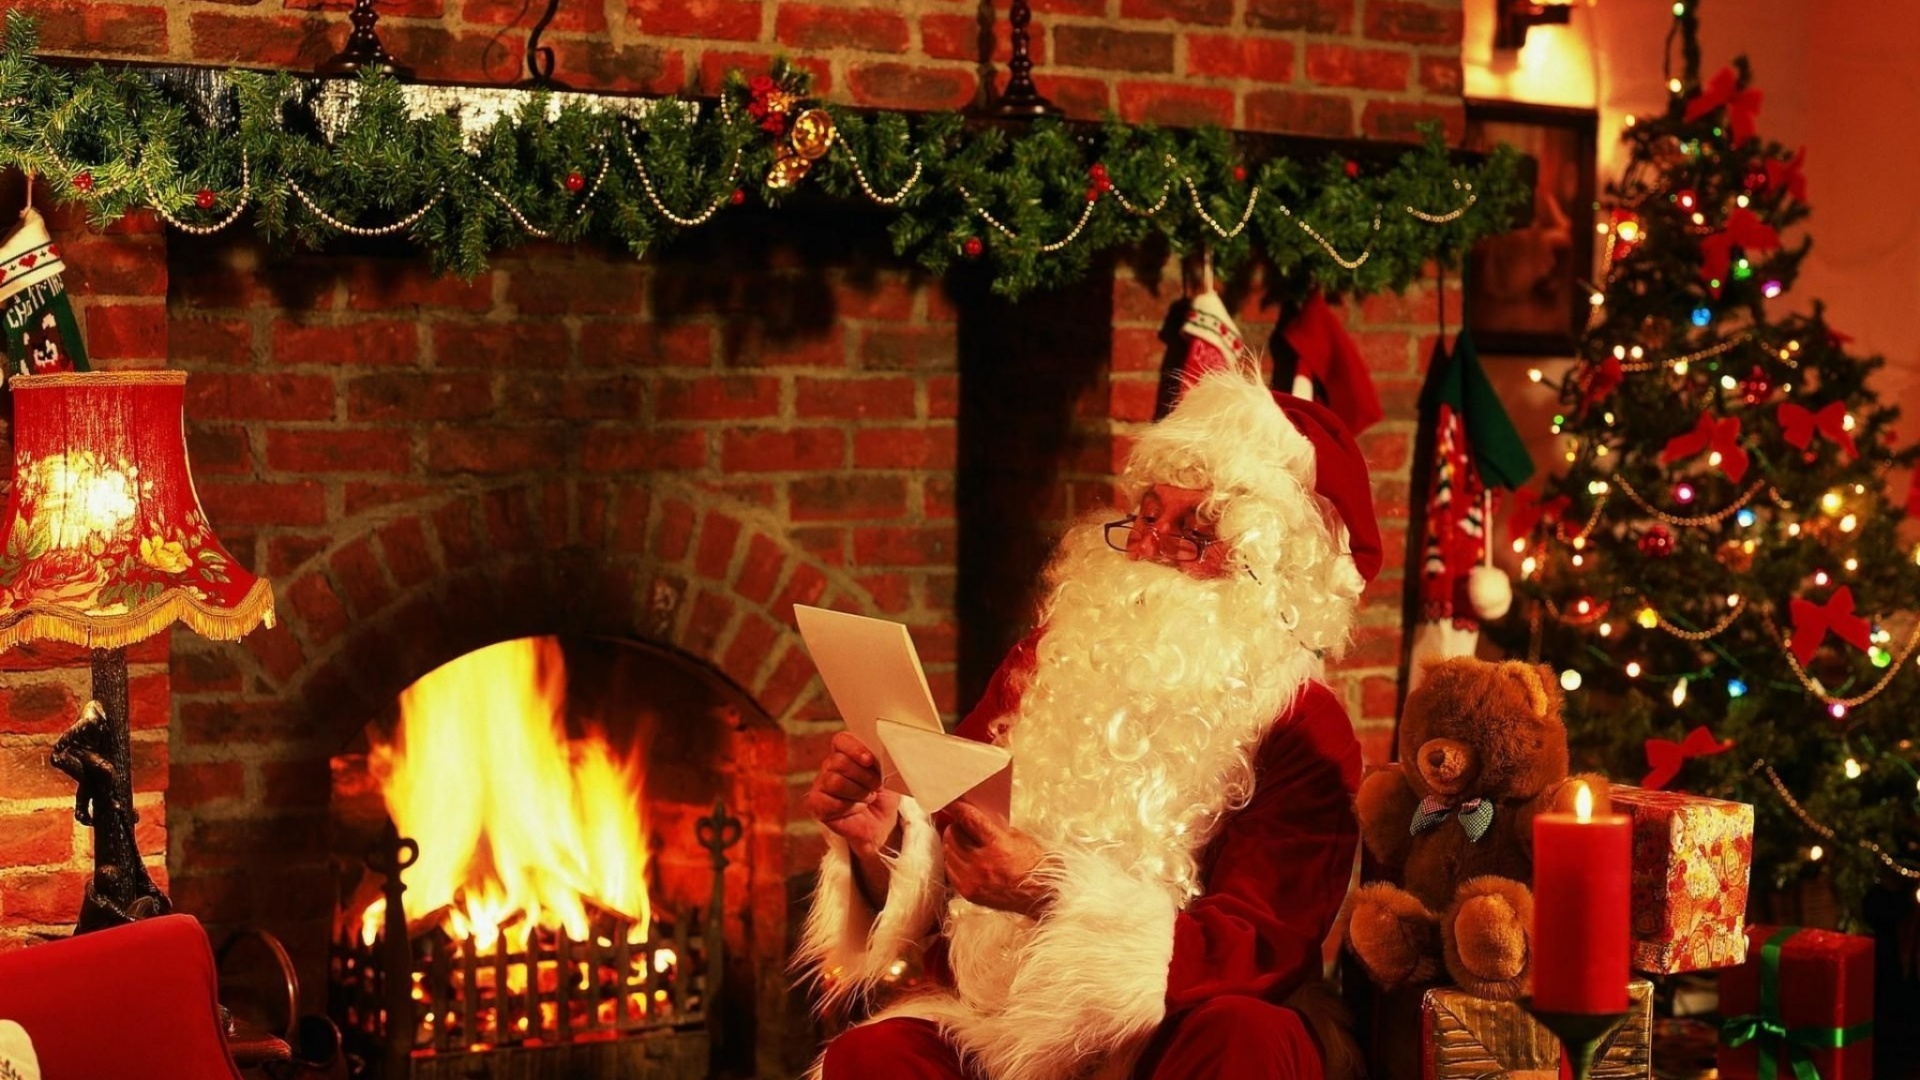 New Year Christmas Santa Claus Letter Gifts Fireplace Christmas Tree Teddy Bear Candle